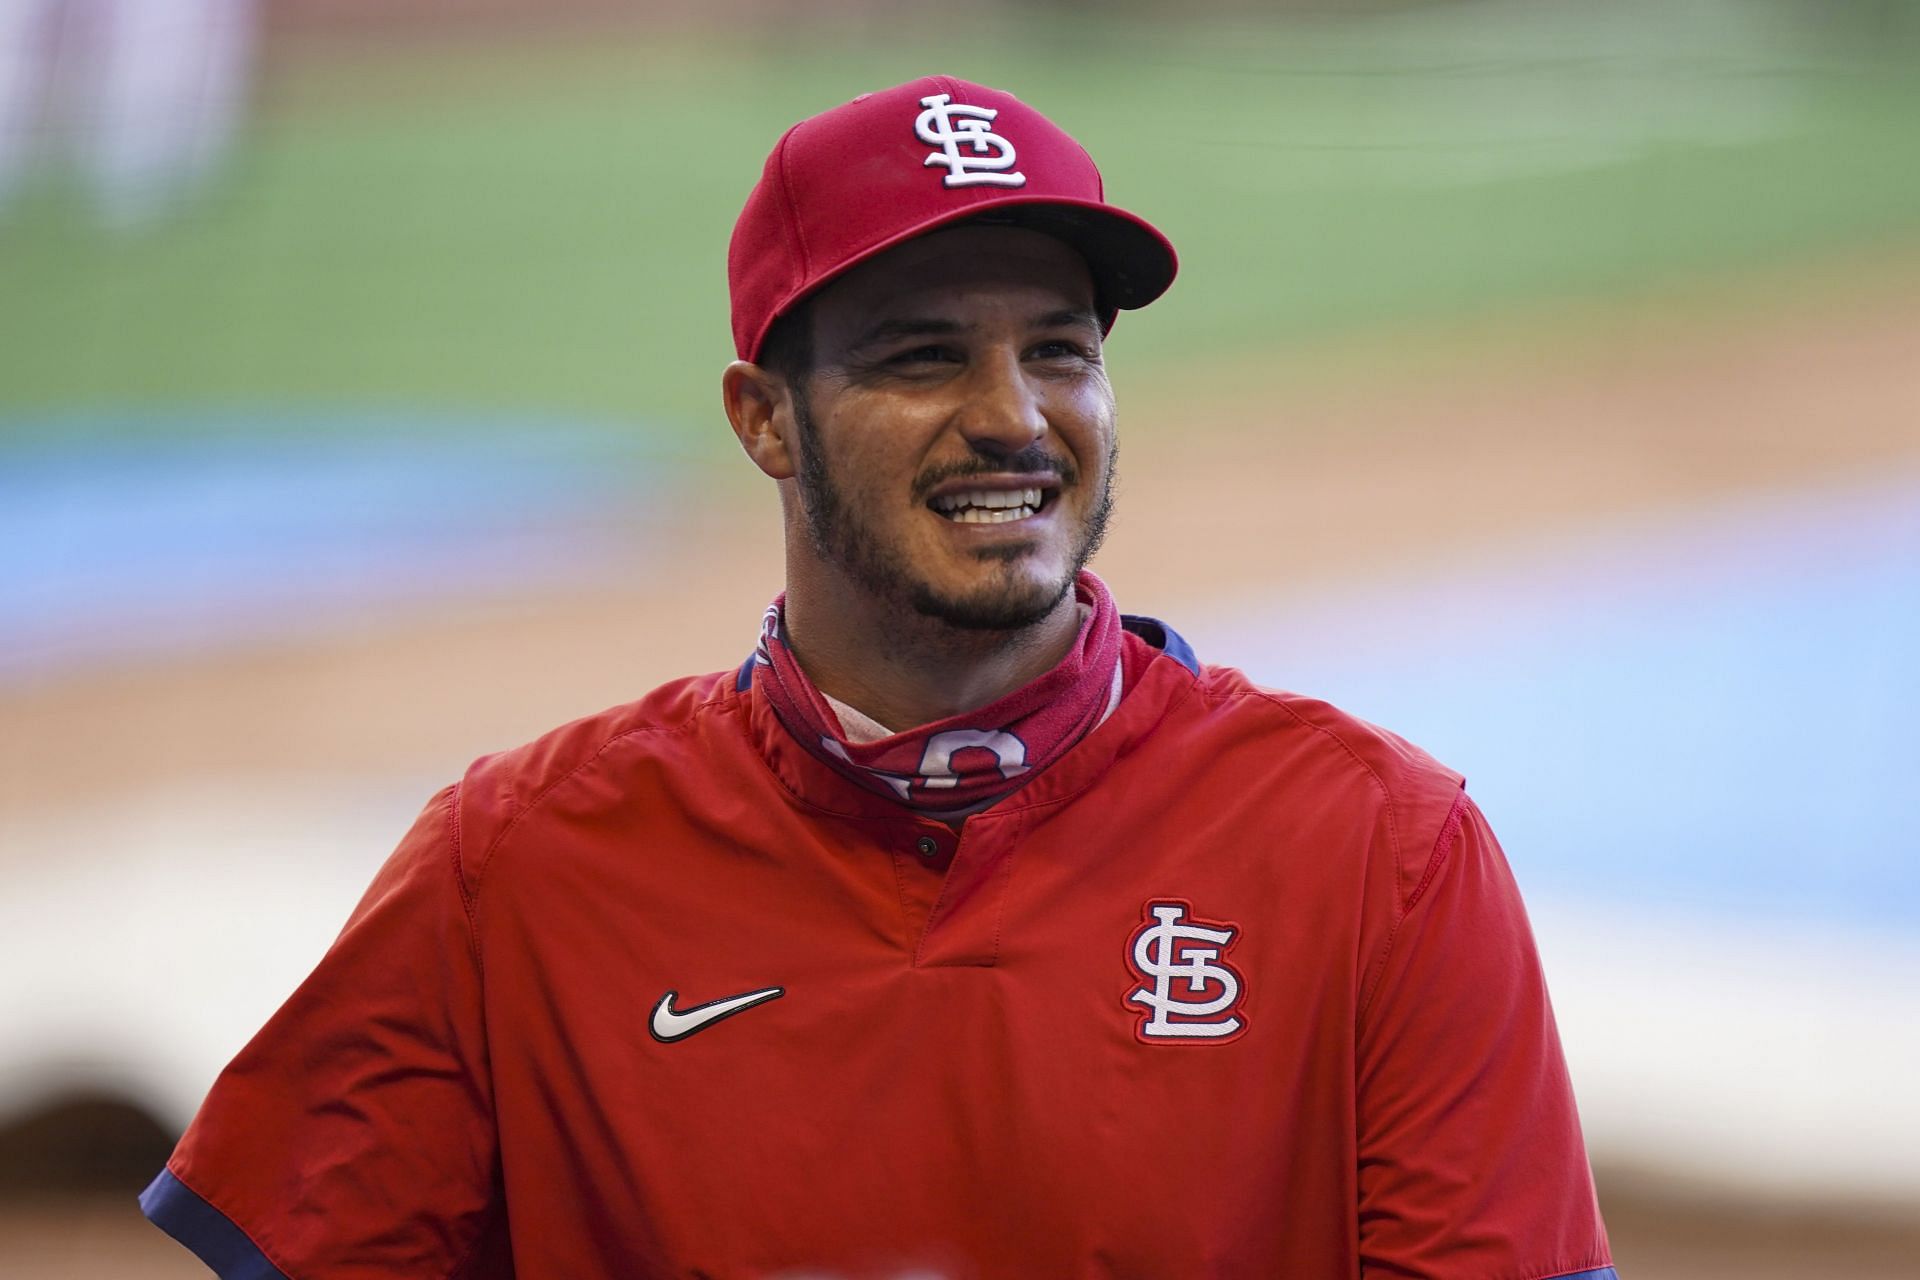 Nolan Arenado says he is happy in St. Louis - A Hunt and Peck